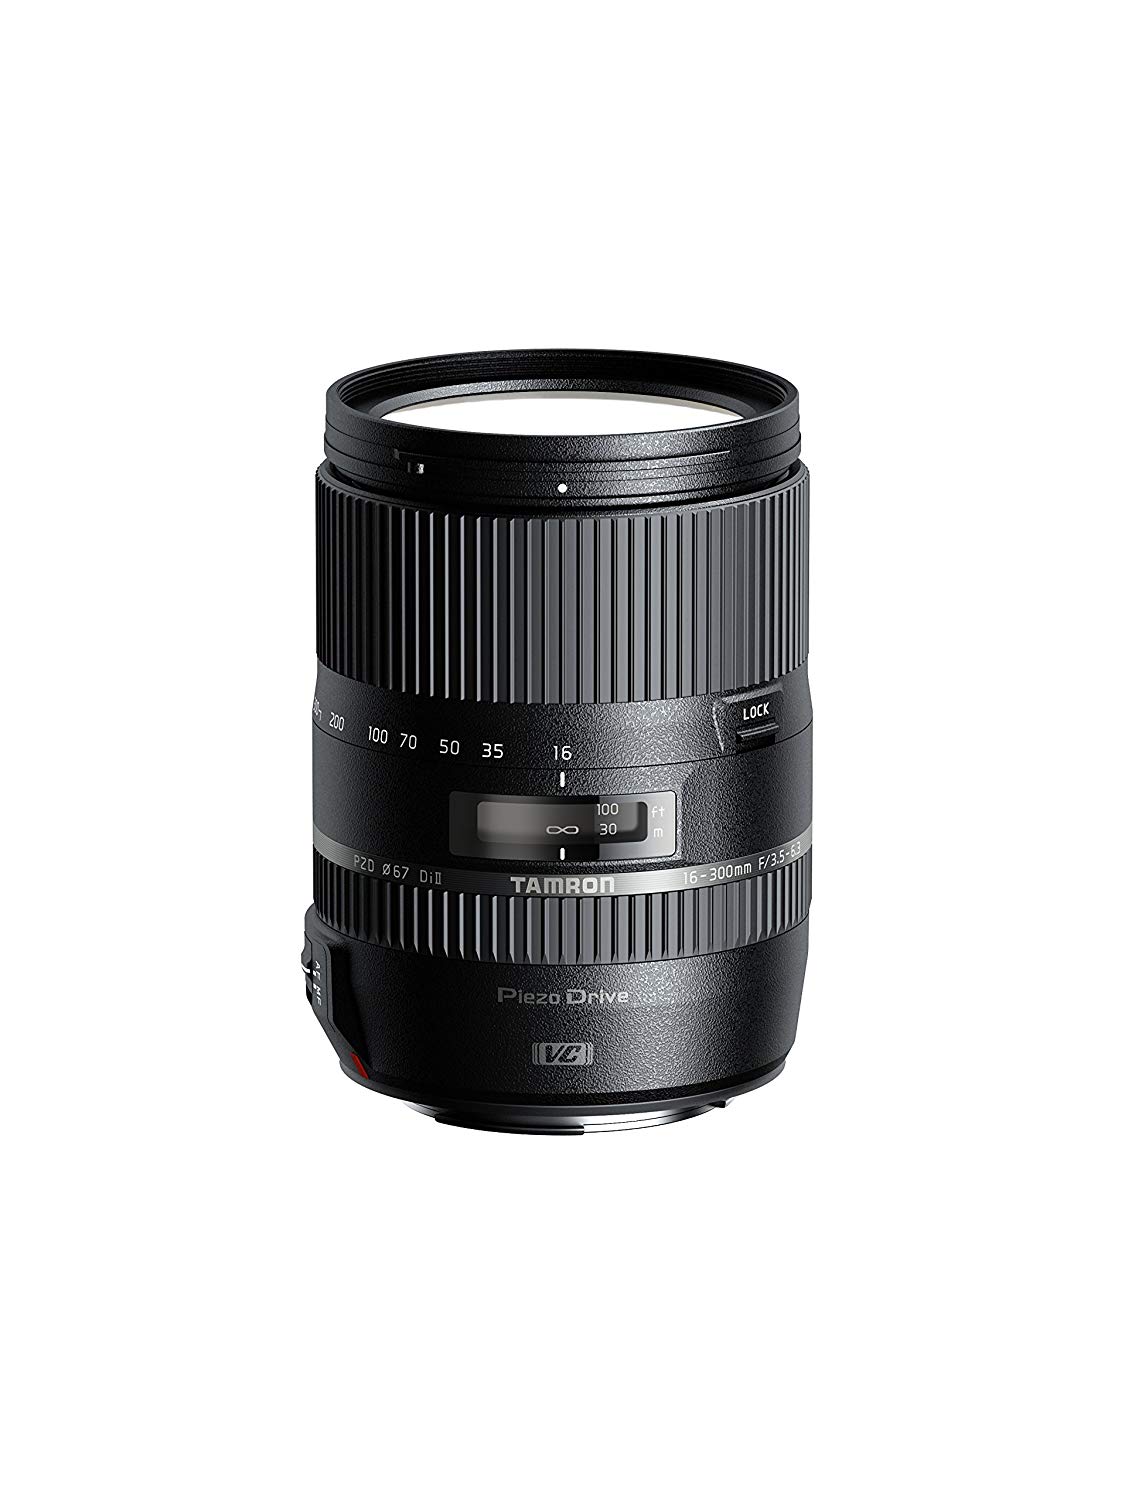 Tamron AFB016C700 16-300 F/3.5-6.3 Di II VC PZD Macro 16-300mm IS Interchangeable Lens for Canon EF-S Cameras